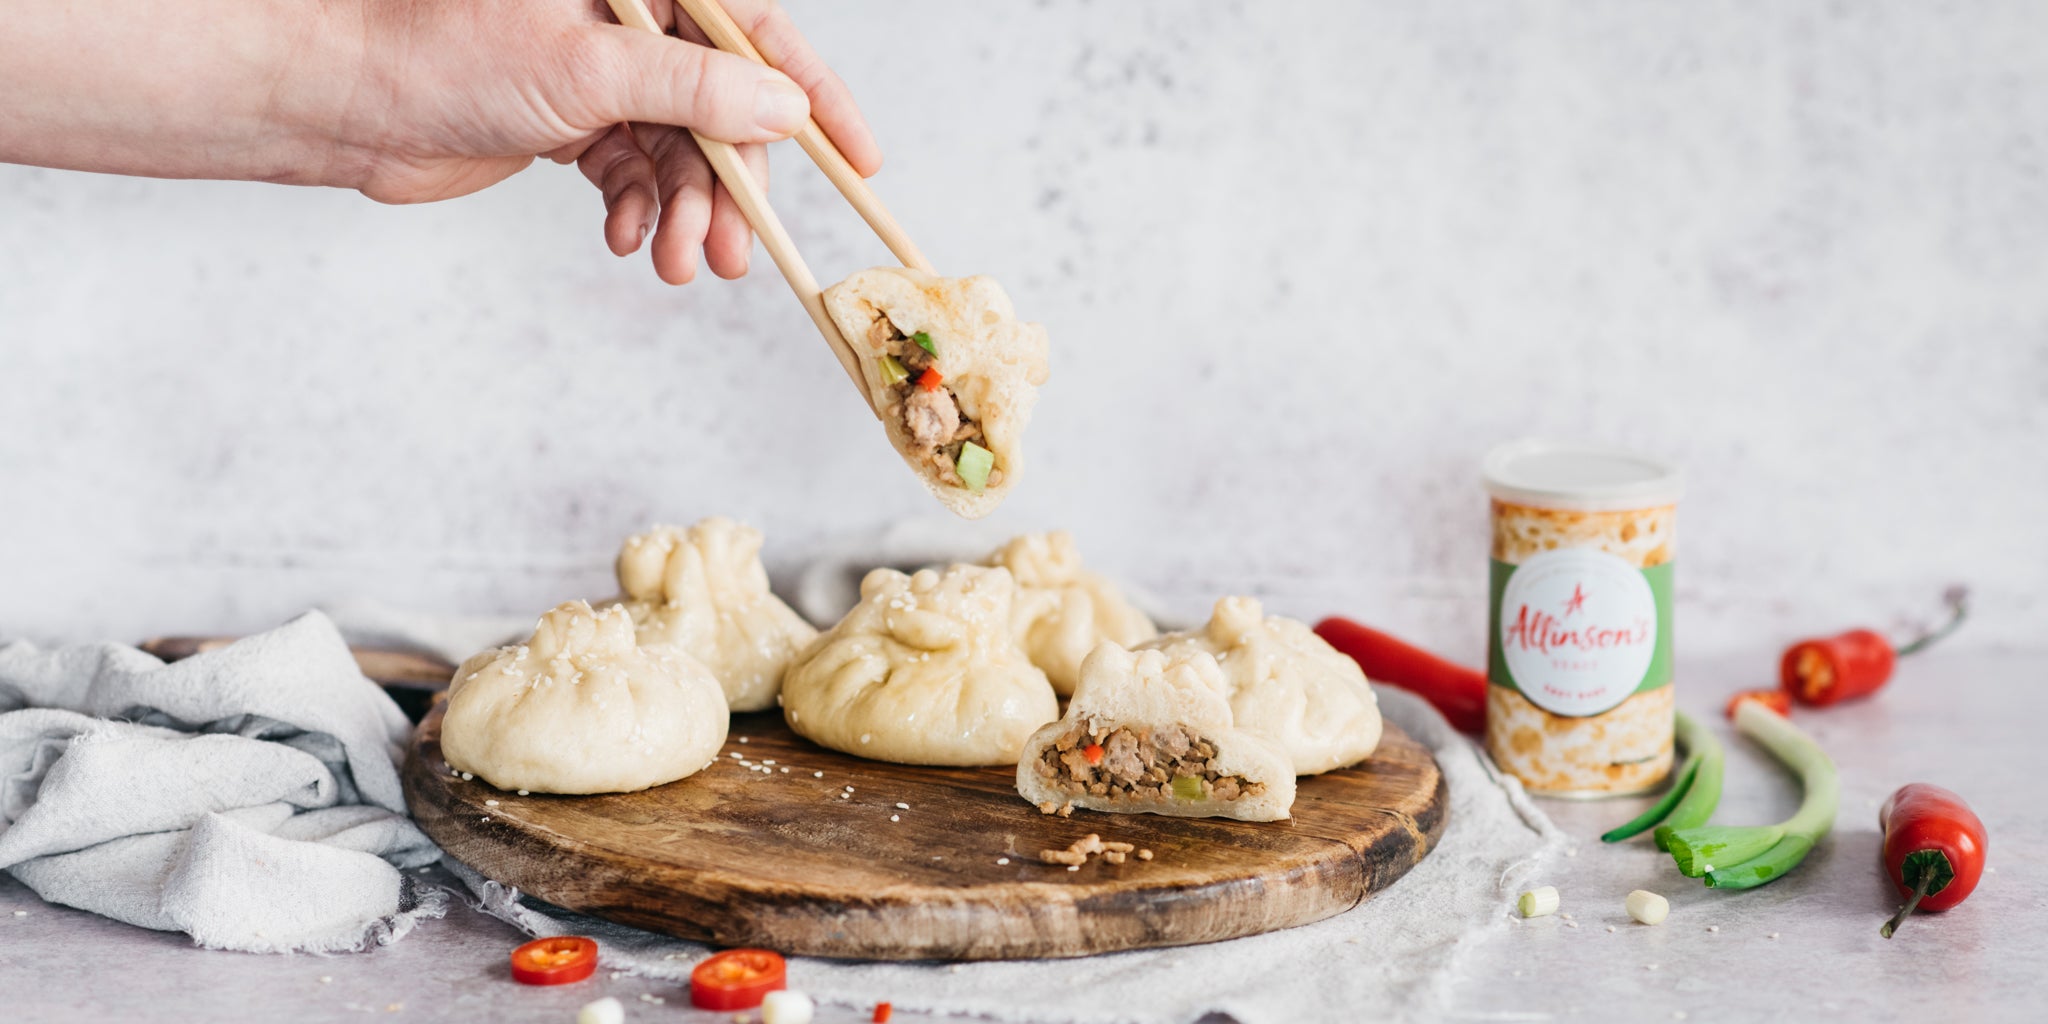 Bao buns on a wooden board, hand reaching in with chopsticks to lift one